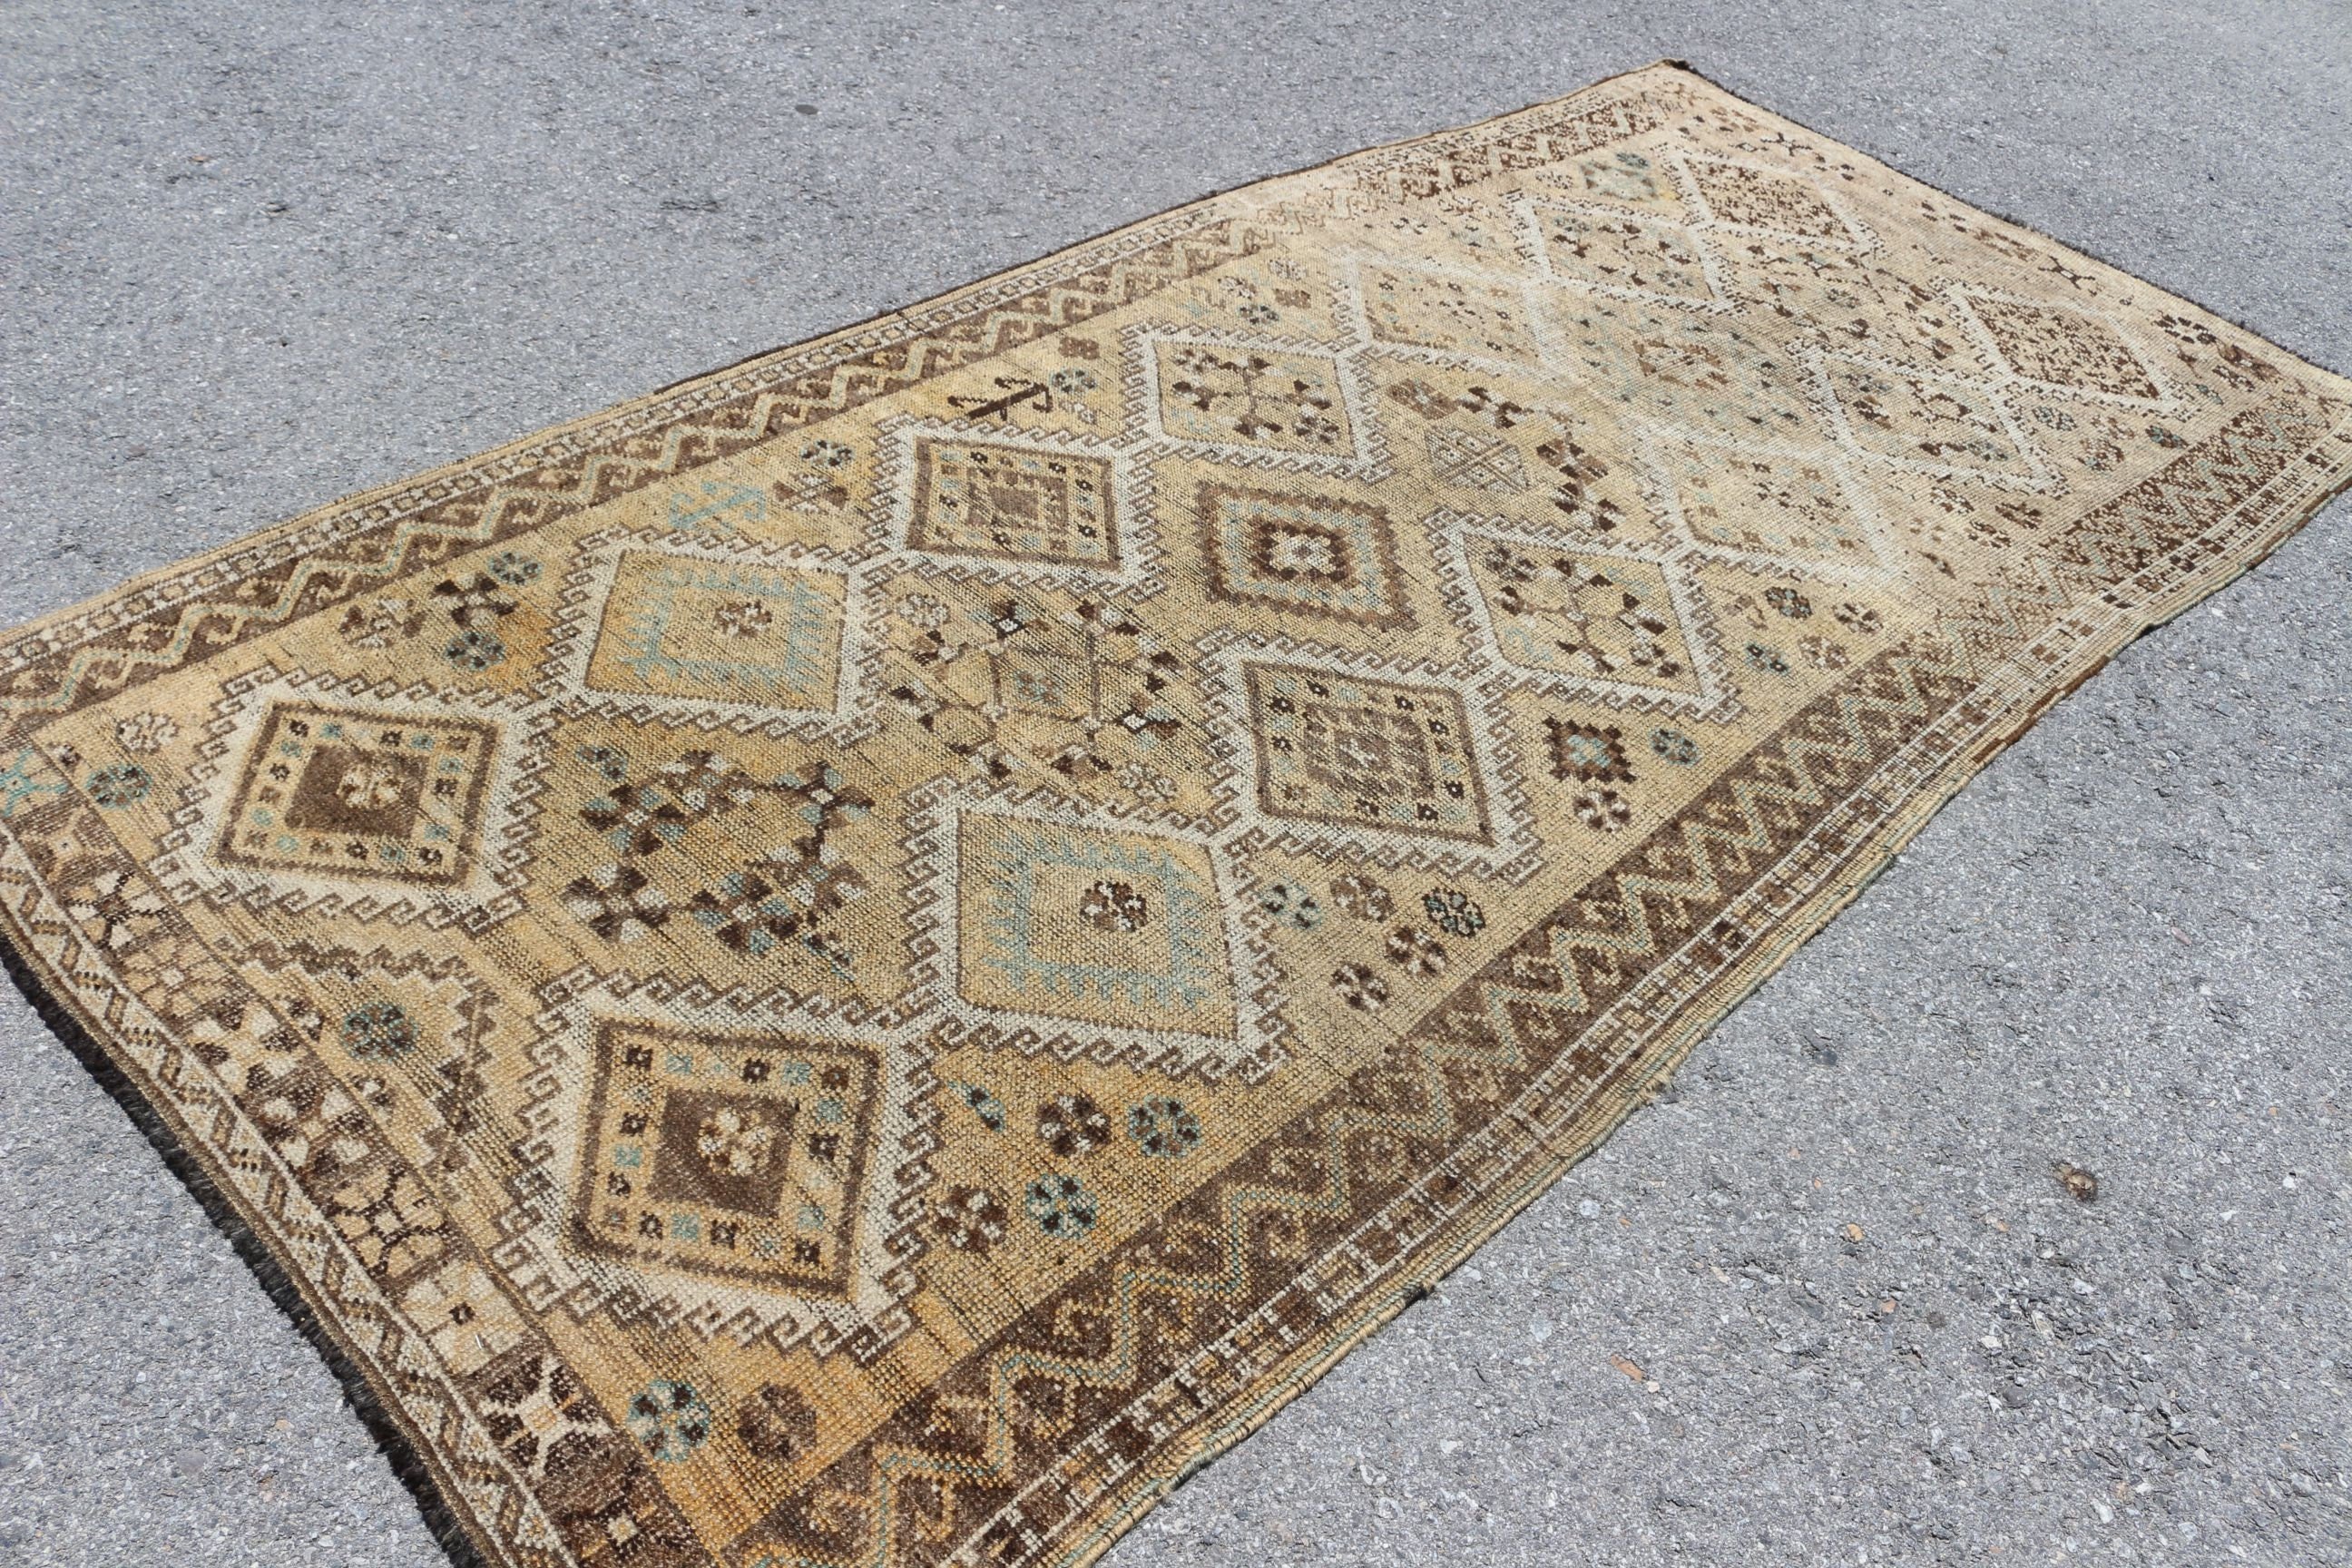 Cool Rugs, Beige Moroccan Rugs, Rugs for Salon, Salon Rugs, 4.5x9.8 ft Large Rugs, Vintage Rug, Dining Room Rug, Turkish Rug, Antique Rug